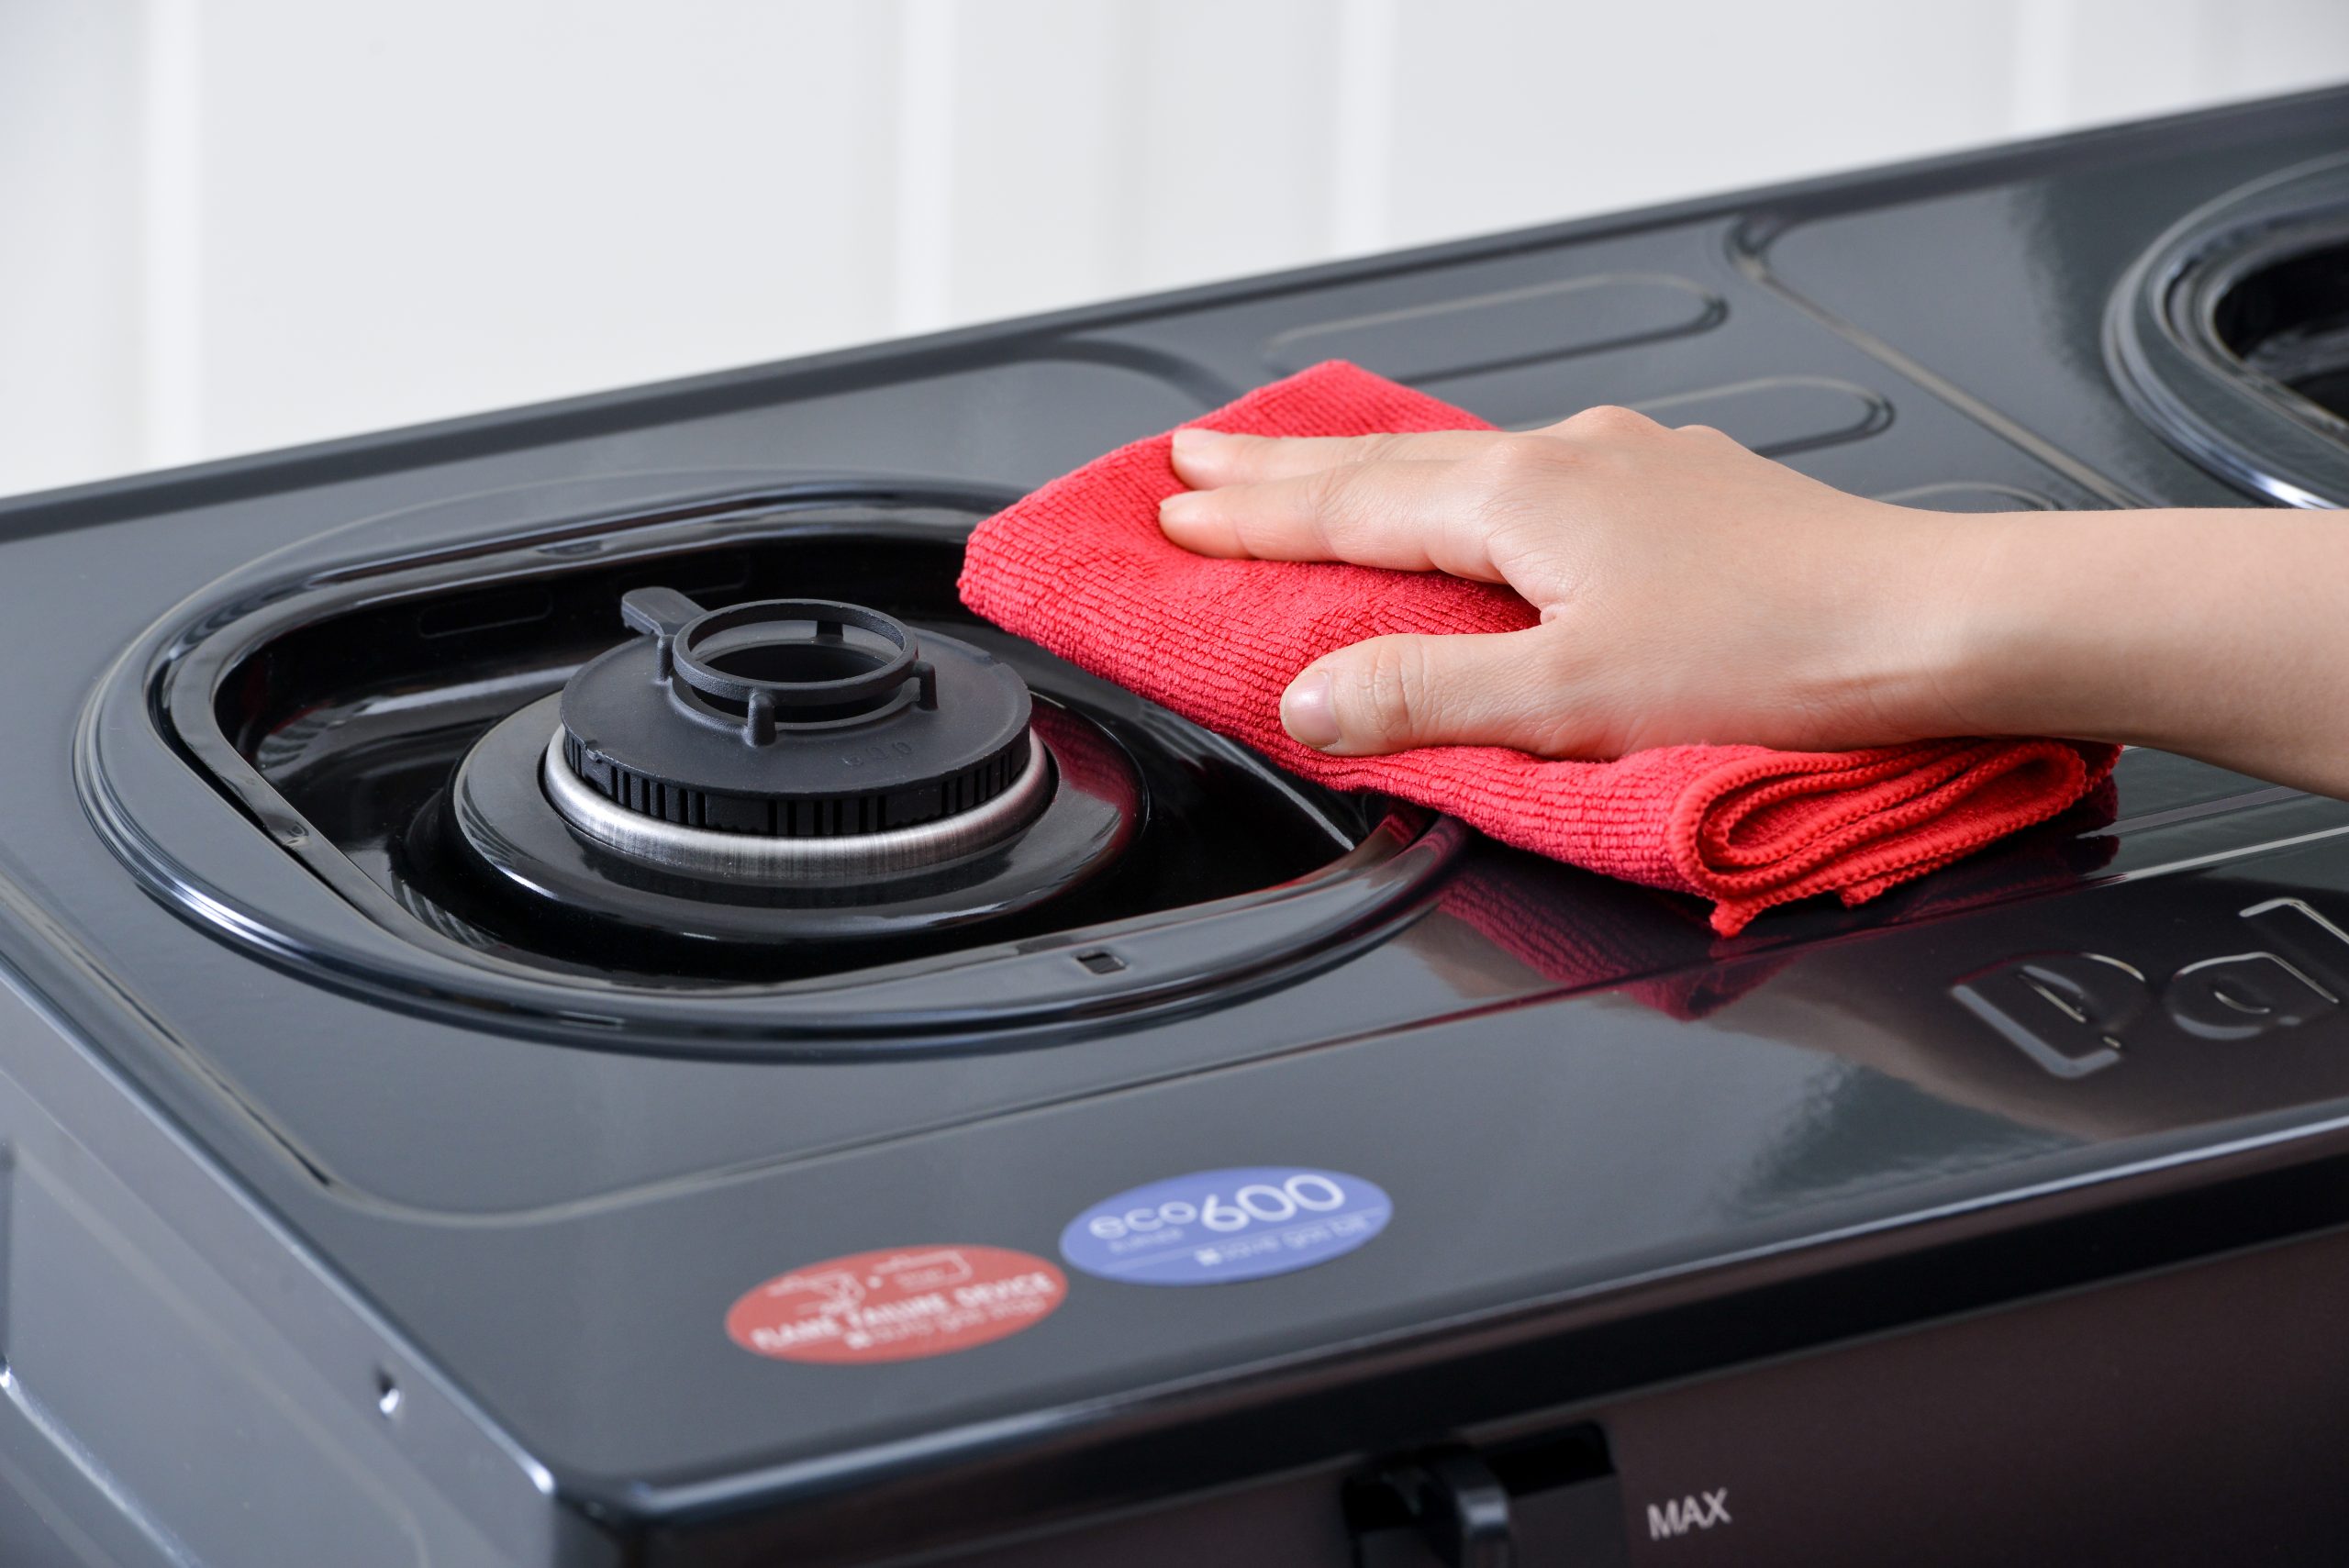 Good tips to use the gas stove safely